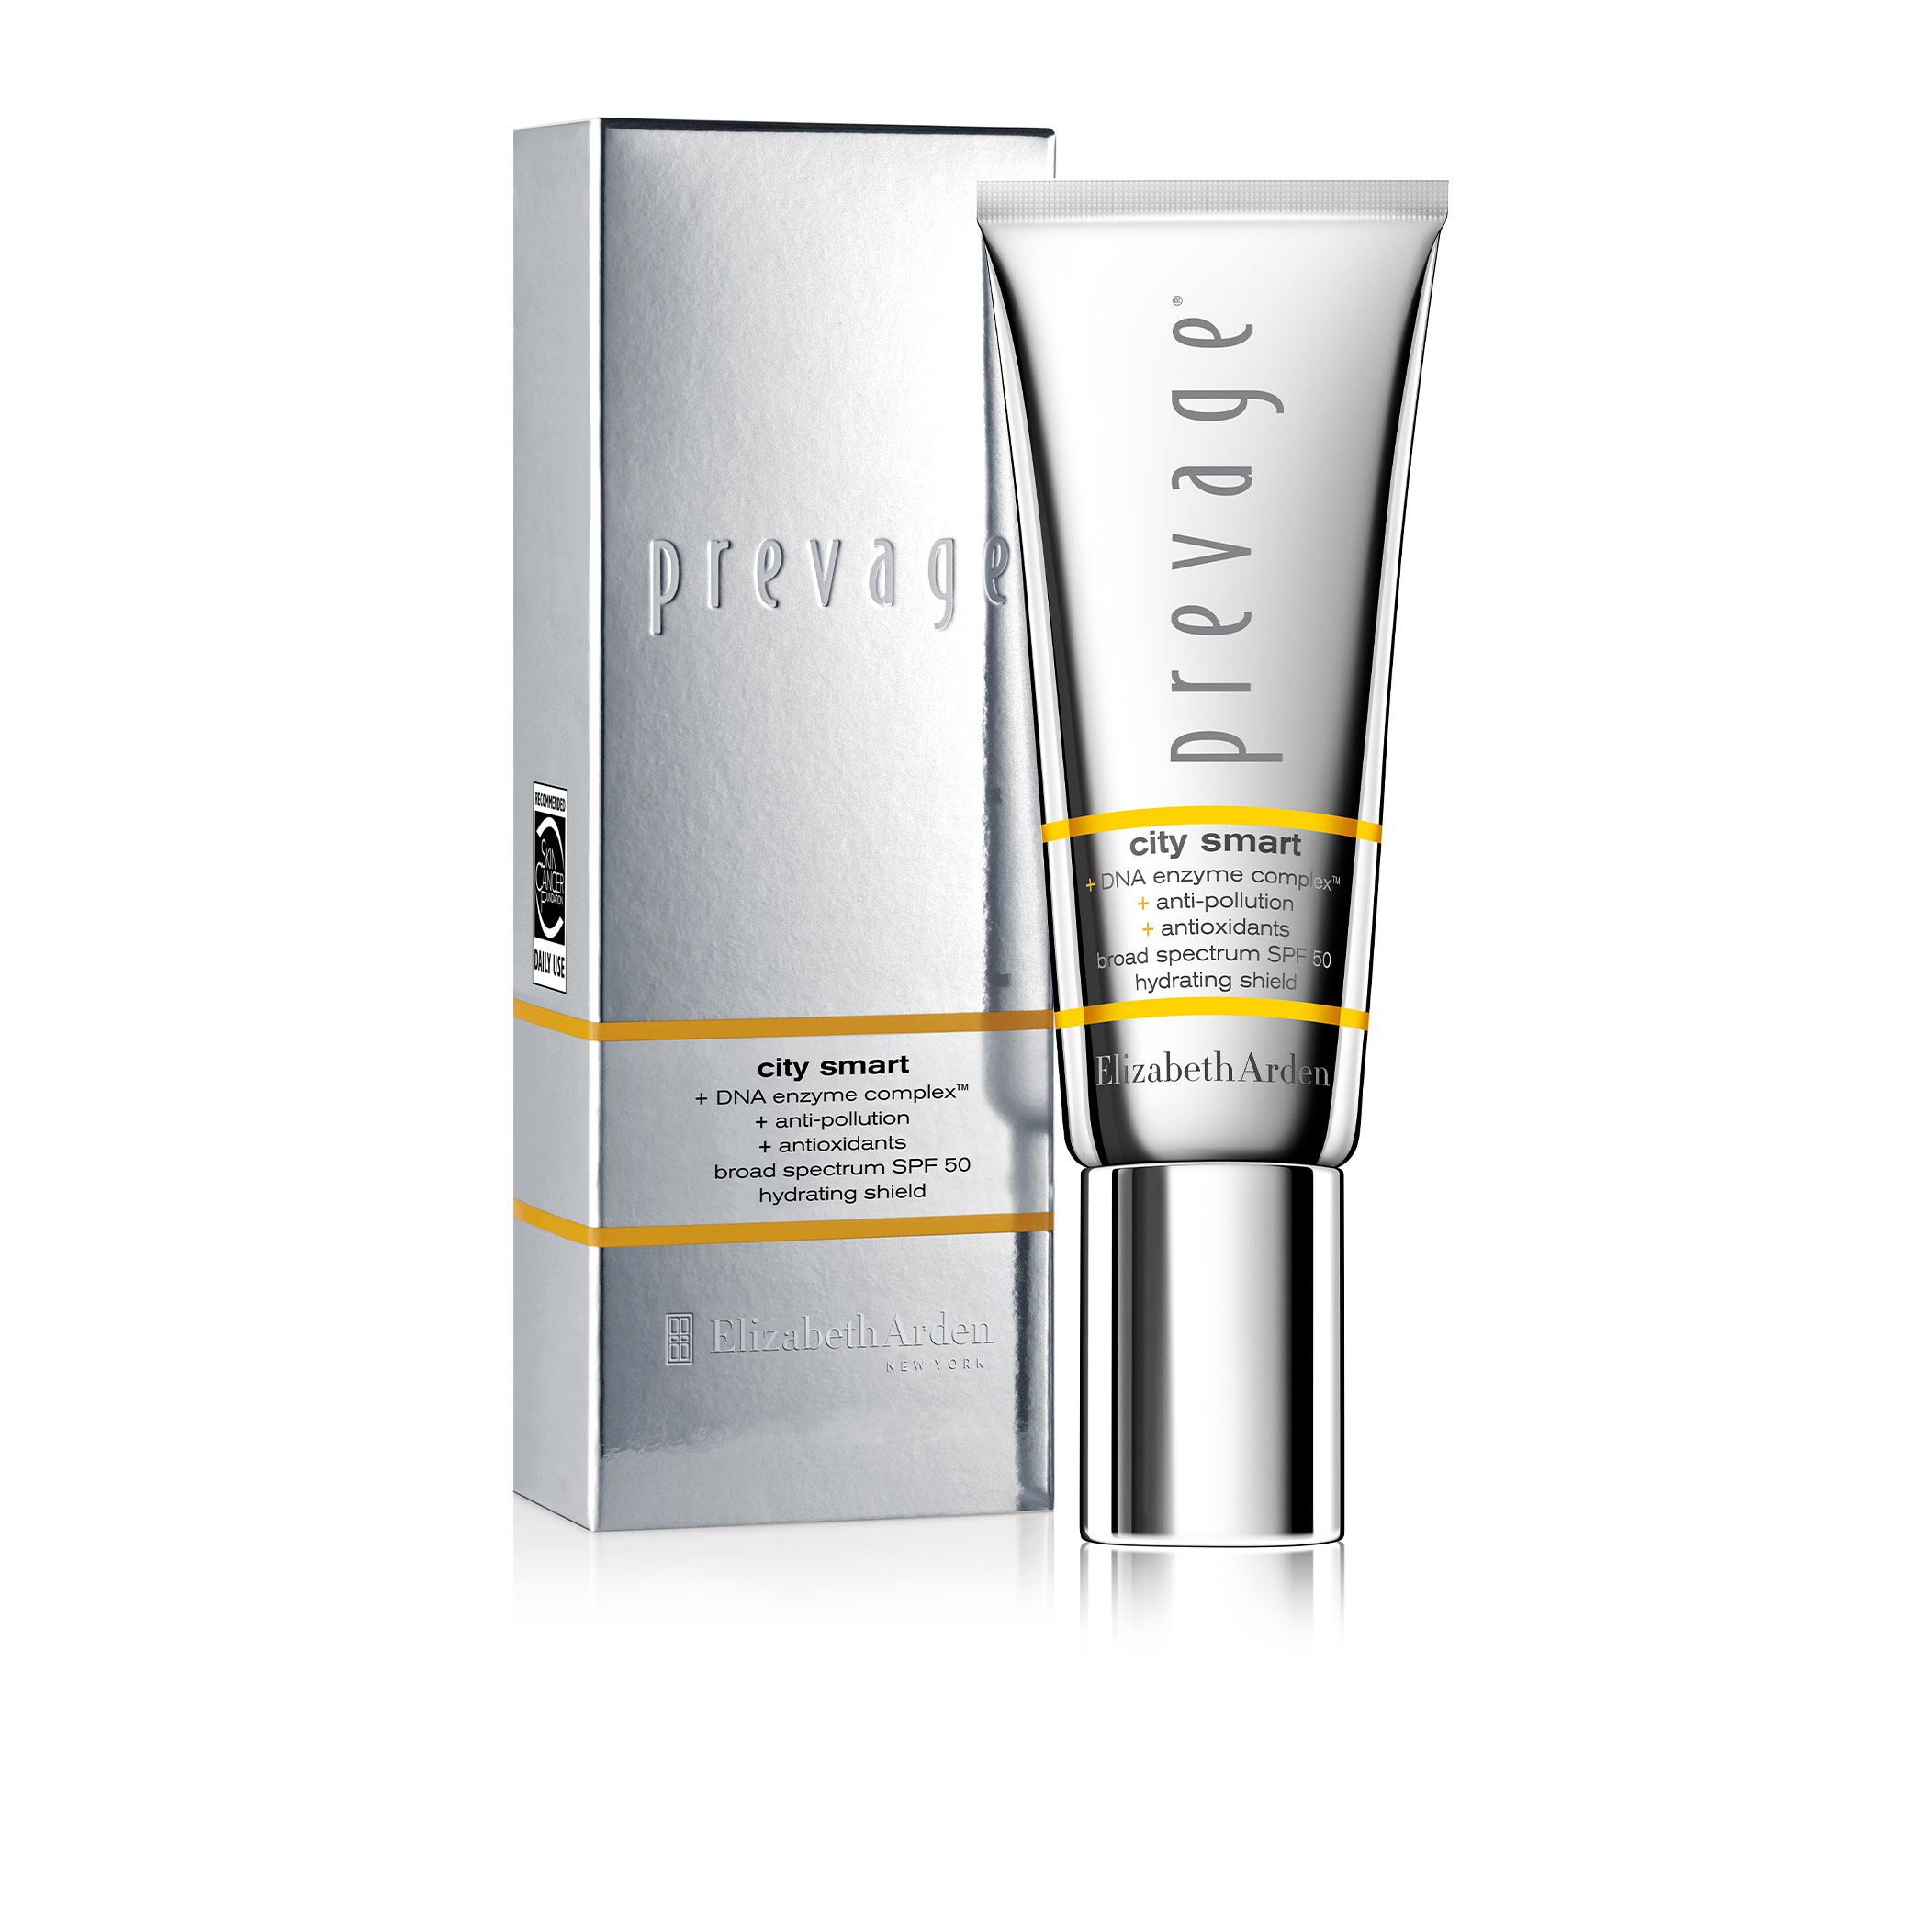 PREVAGE® City Smart Broad Spectrum SPF 50 Hydrating Shield, , large